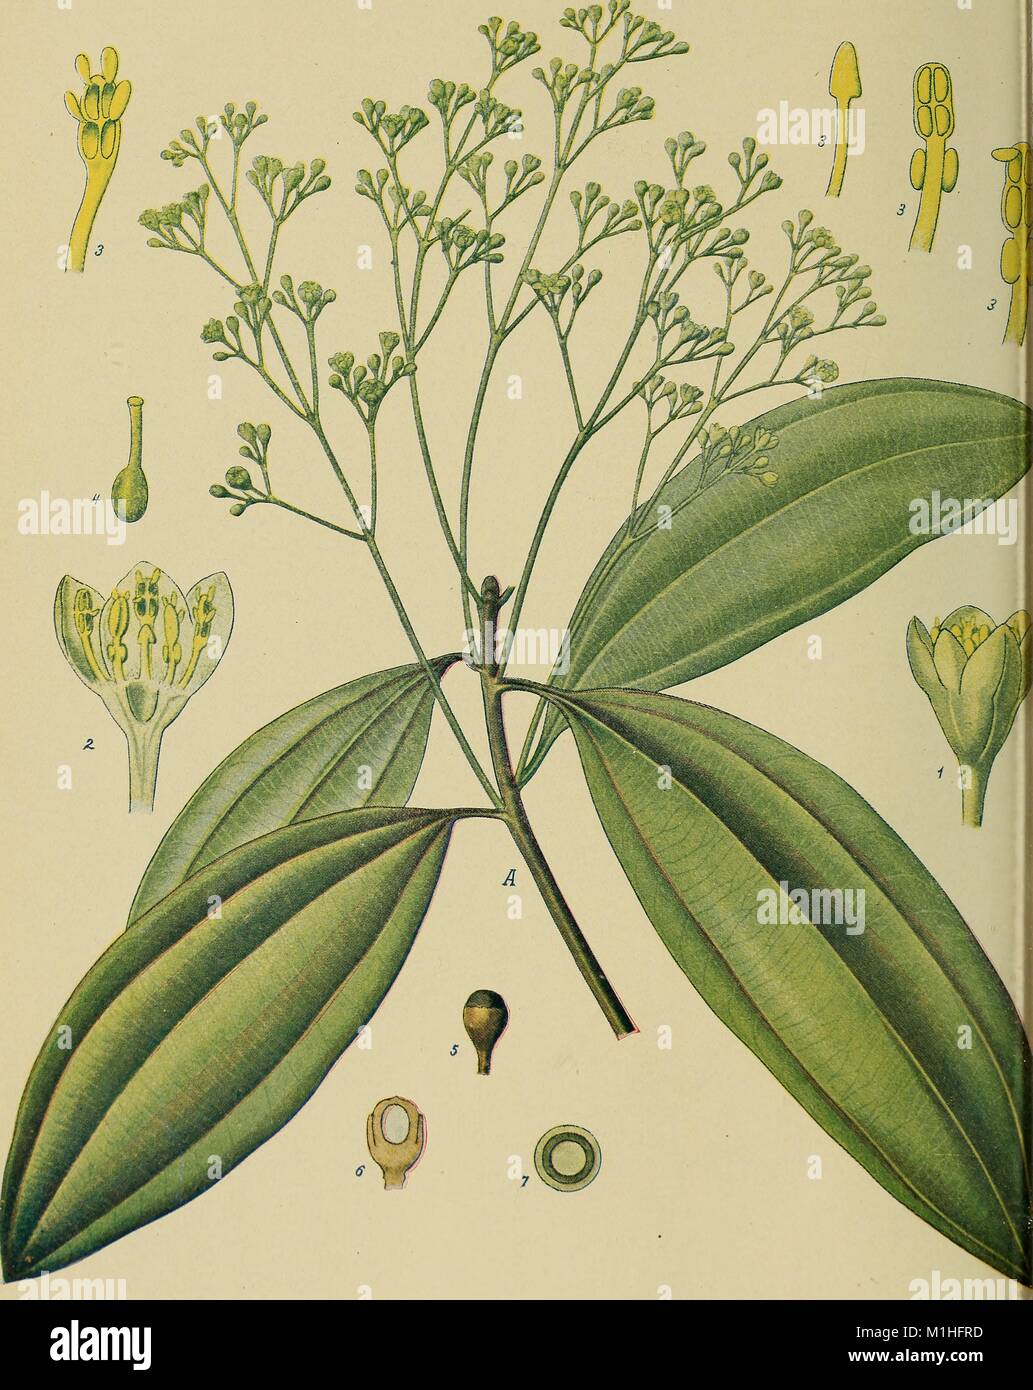 Color illustration depicting a flowering branch, with four leaves, of the Cassia Cinnamon plant (Cinnamomum cassia blume), along close-ups of the plant's seeds and flowers, from the serial volume 'Birds and Nature, ' published by A W Mumford, 1900. () Stock Photo